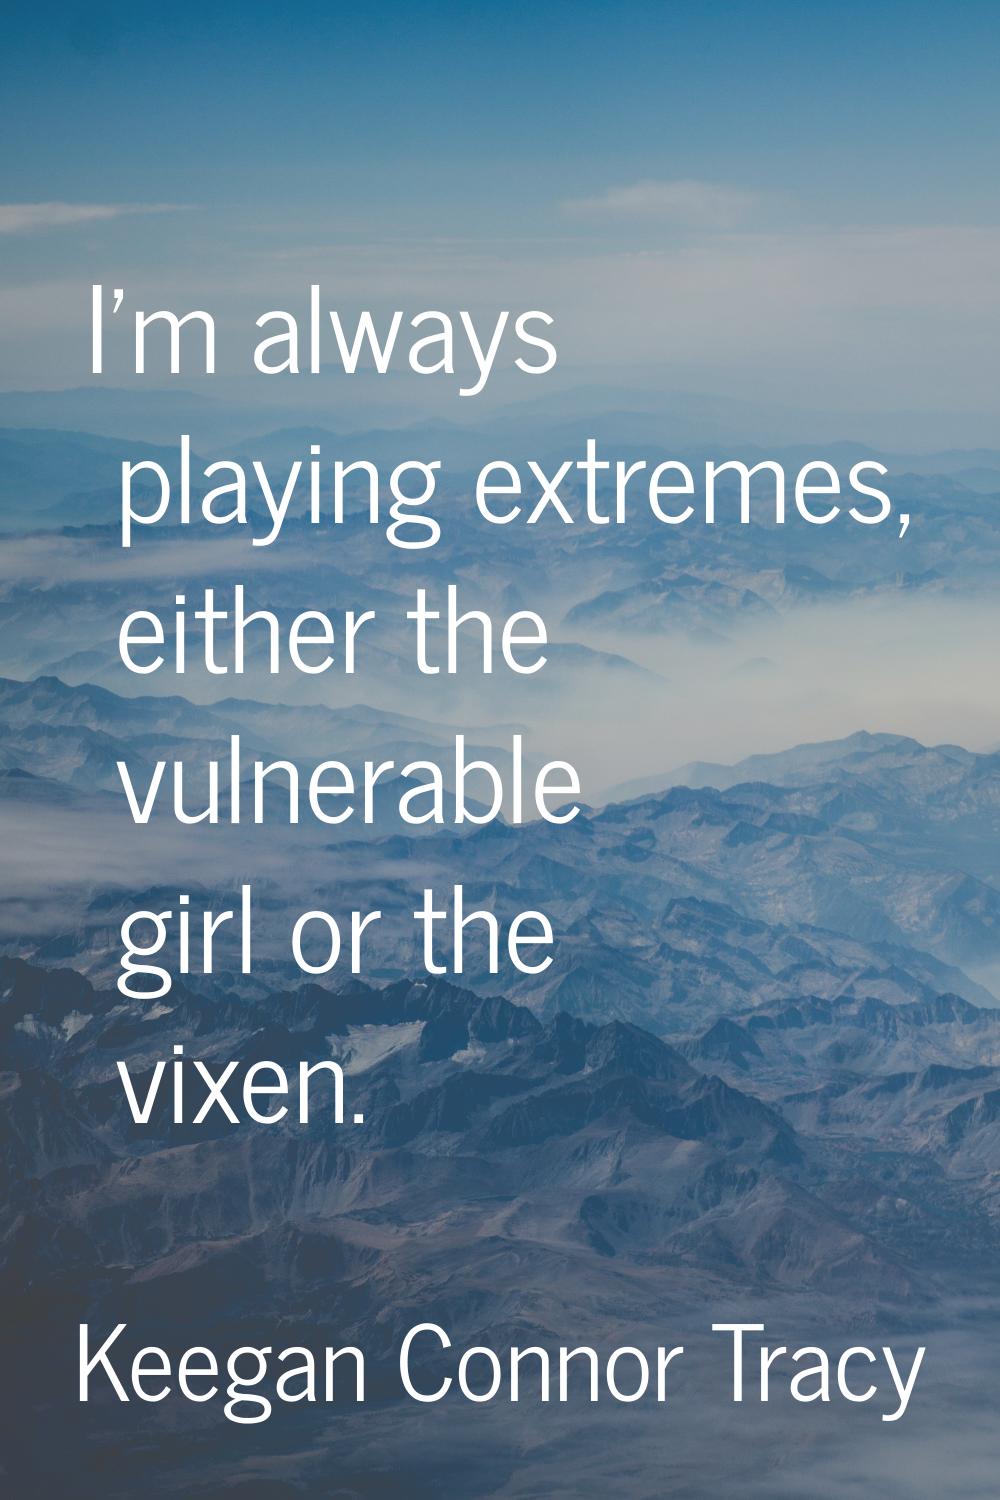 I'm always playing extremes, either the vulnerable girl or the vixen.